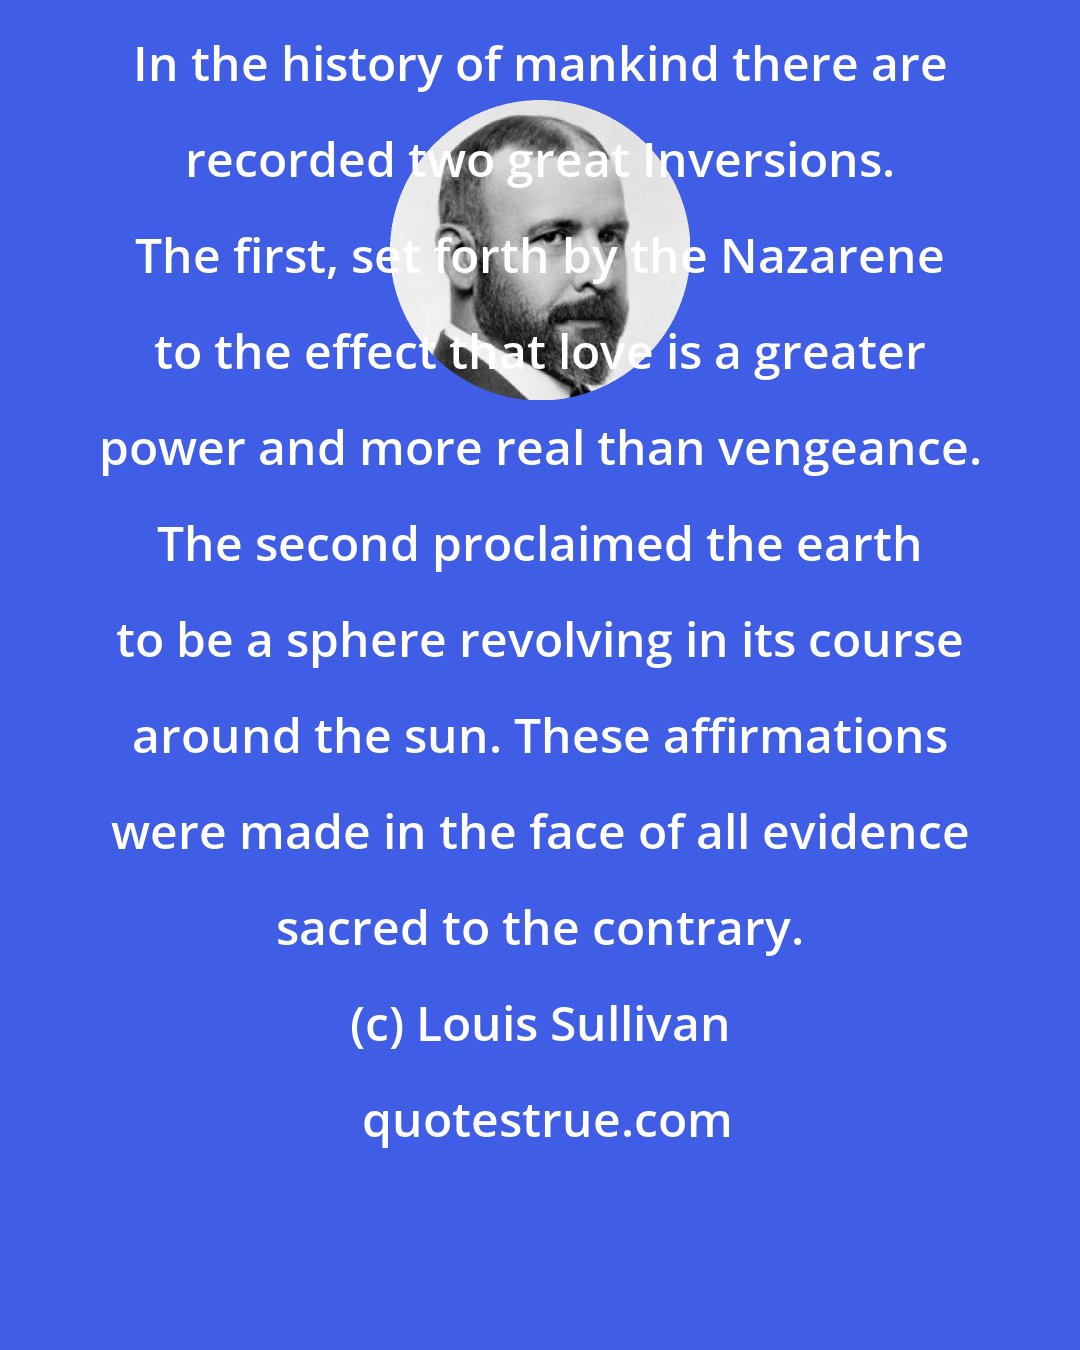 Louis Sullivan: In the history of mankind there are recorded two great Inversions. The first, set forth by the Nazarene to the effect that love is a greater power and more real than vengeance. The second proclaimed the earth to be a sphere revolving in its course around the sun. These affirmations were made in the face of all evidence sacred to the contrary.